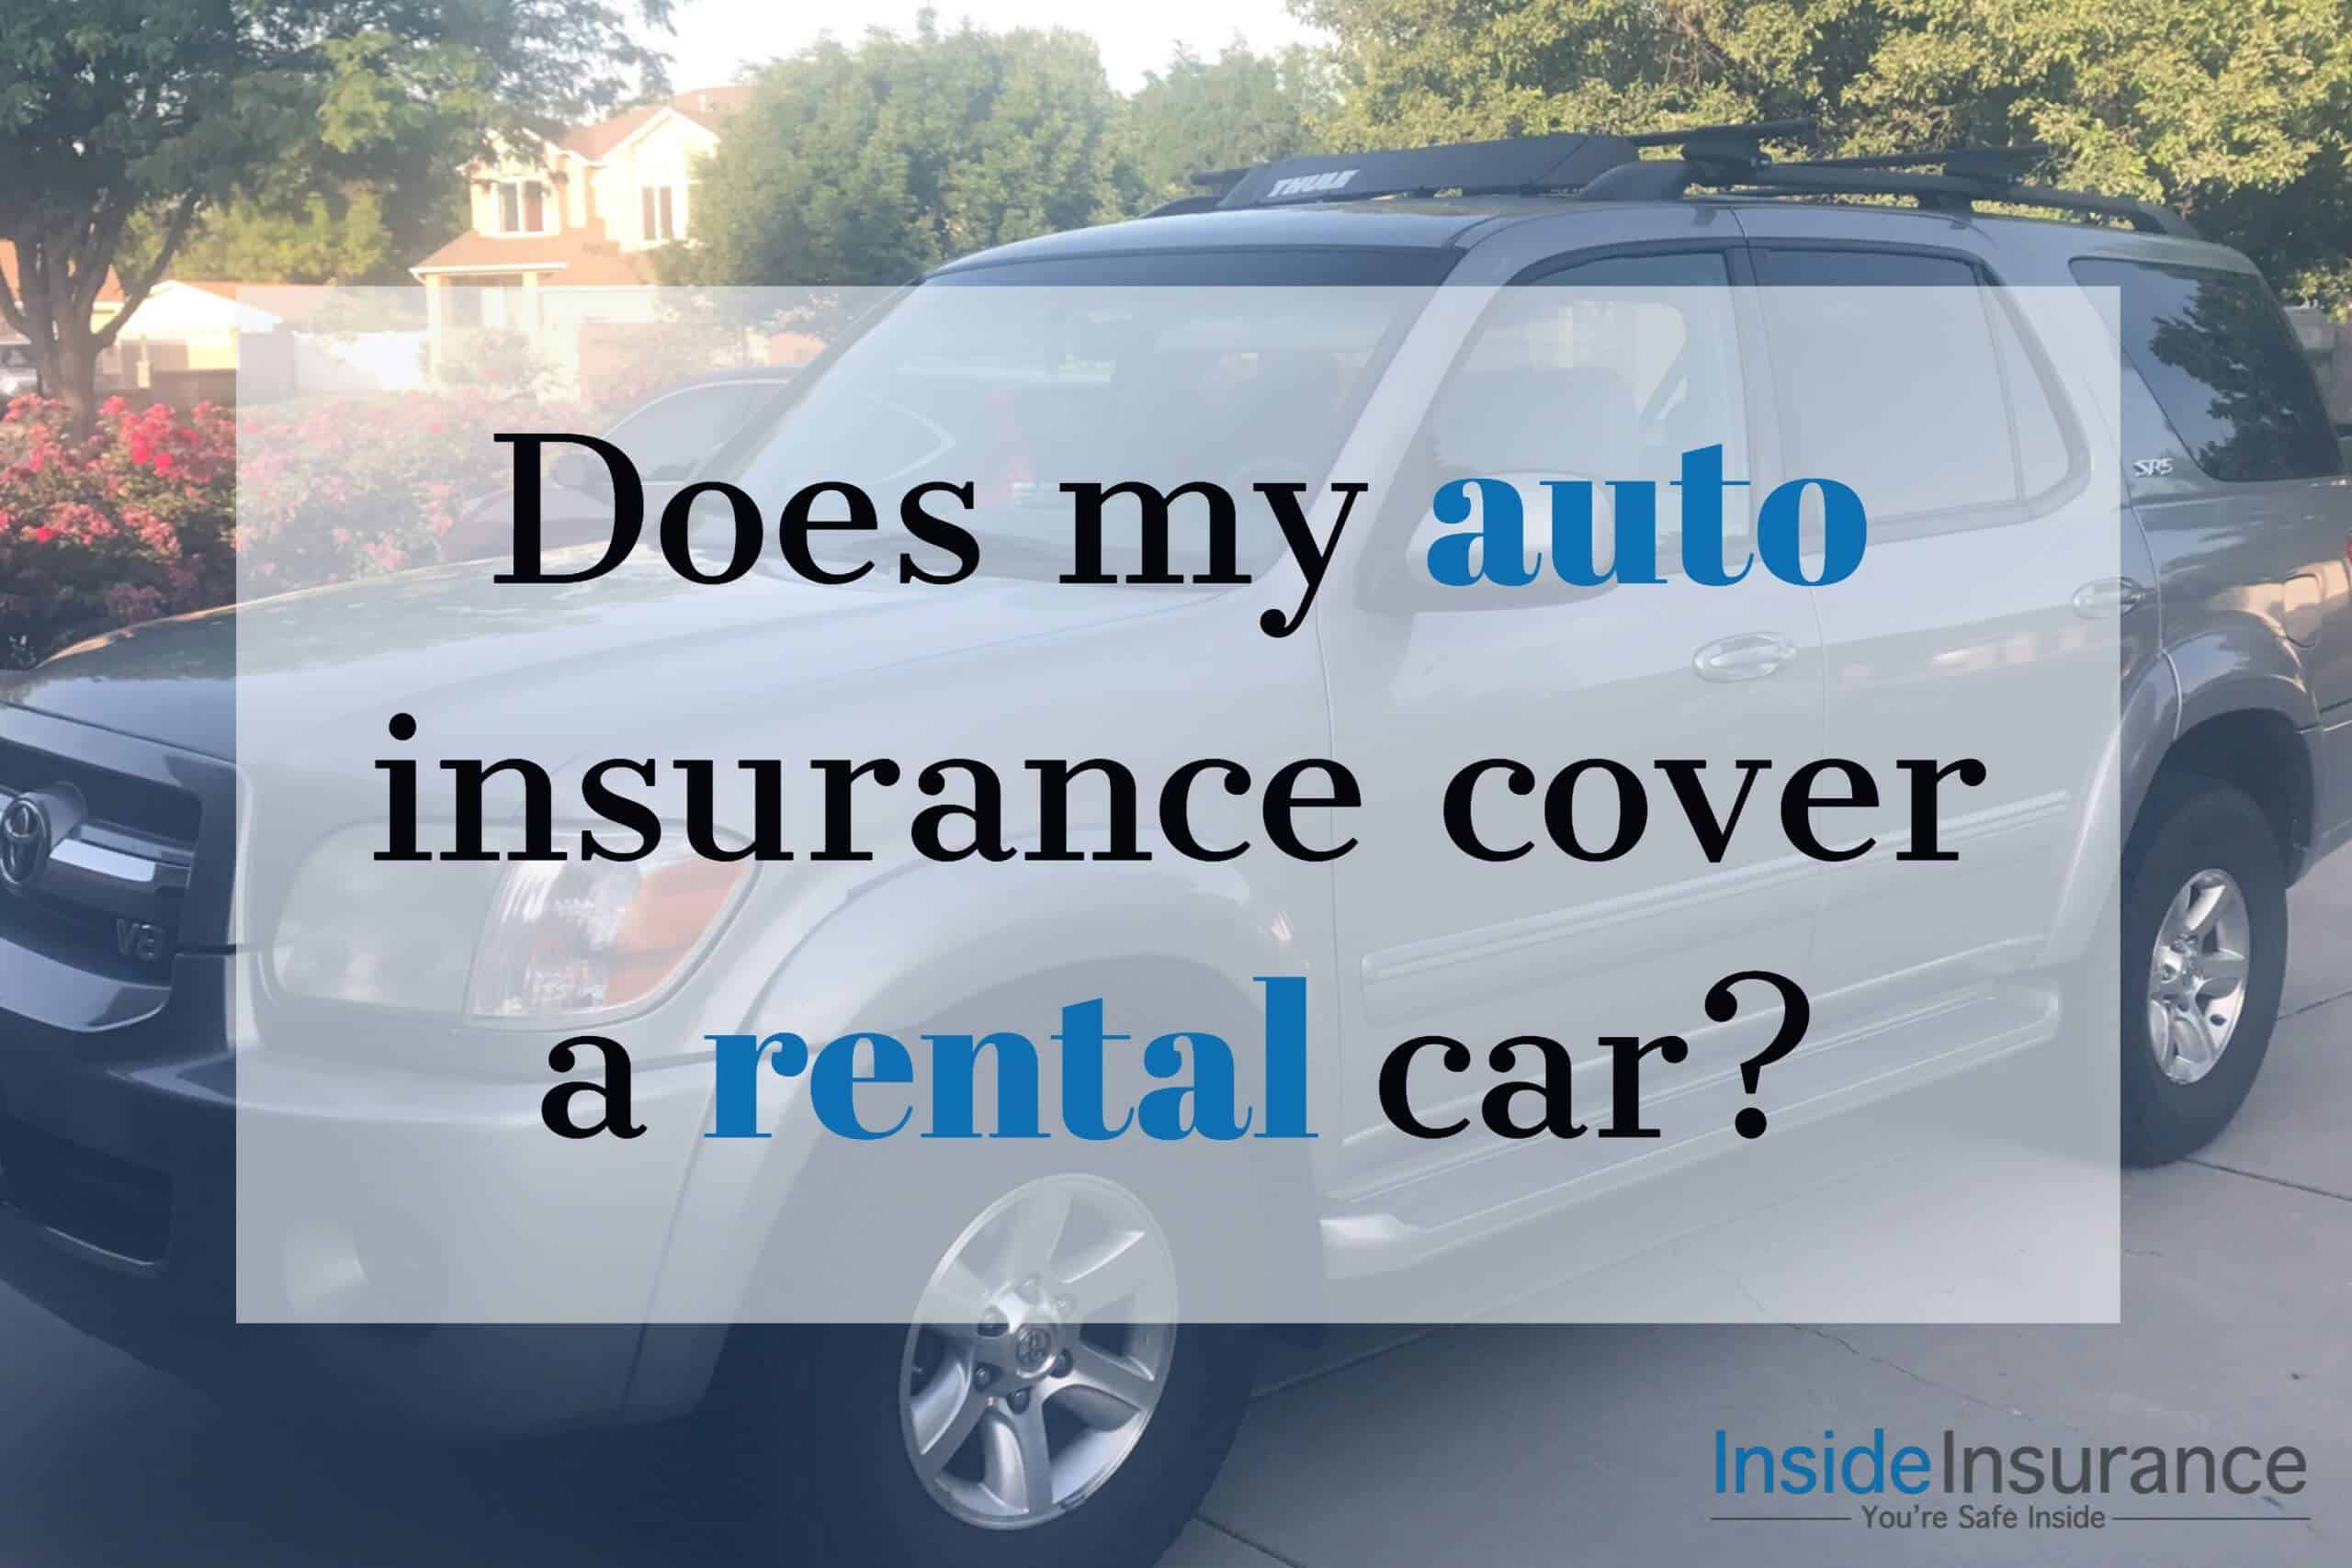 Does auto insurance cover a rental car?